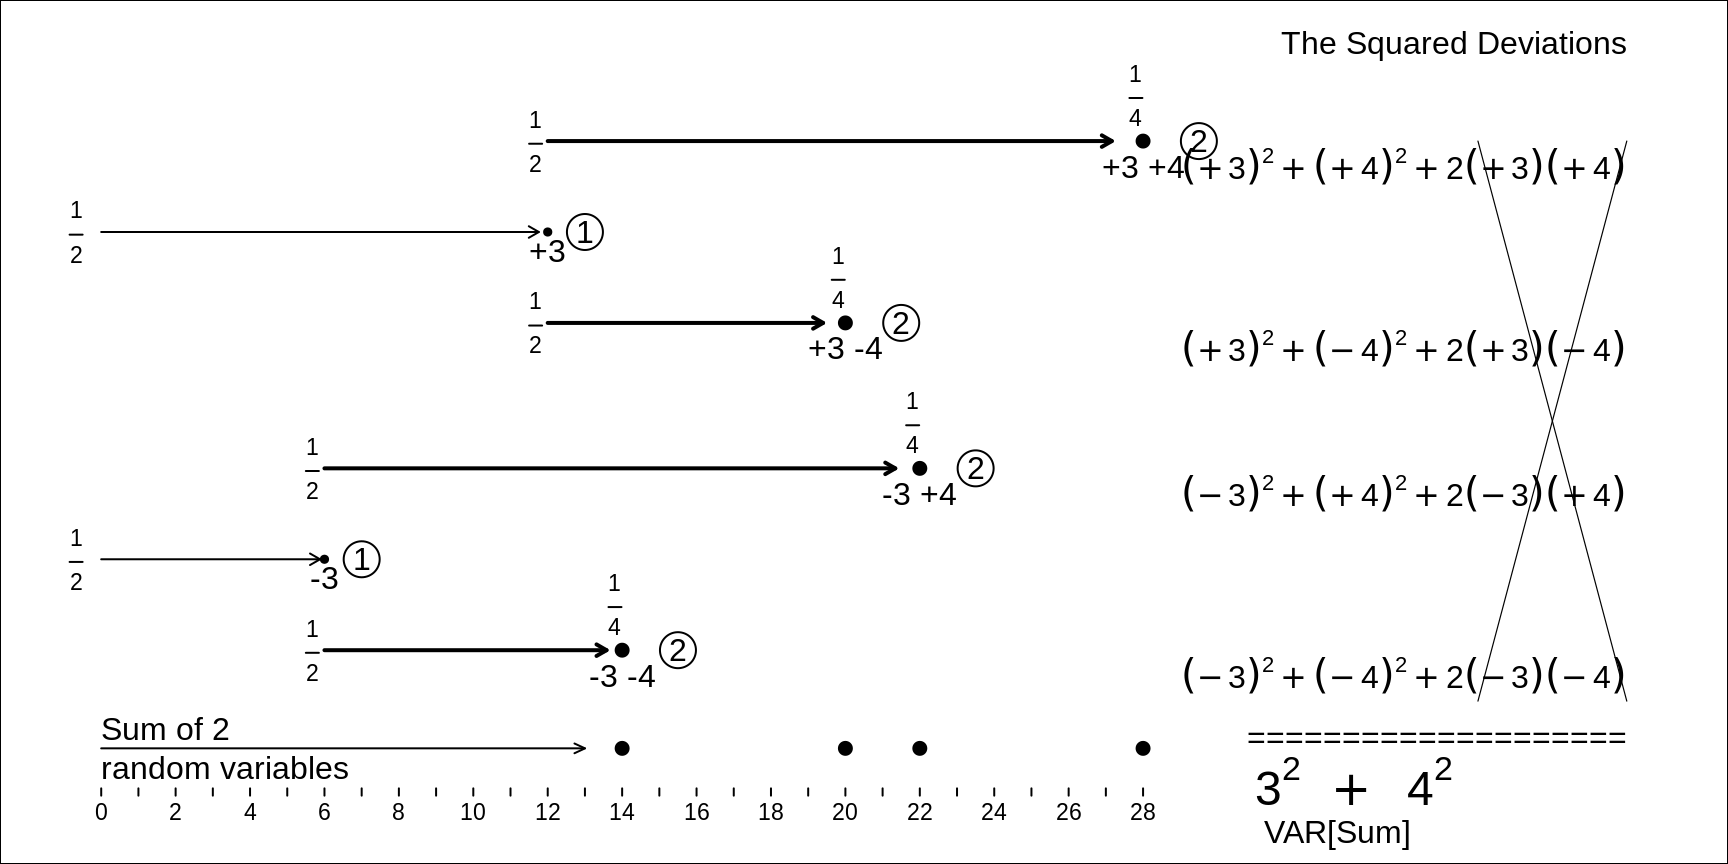 Variance (and thus SD) of the SUM of the two independent random variables, RV1 and RV2, shown above. Each of the 4 equally likely deviations of the sum from its expectation is decomposed into its 2 components. This, (by the expansion rule for (a+b) squared that you learned in high school), each squared deviation becomes a sum of 2 squares, and a 'cross-product'. But the 4 cross-products cancel each other, and you are left with the sums of two squares, the original 3-squared and the  original 4-squared, i.e. the variances of RV1 and RV2.